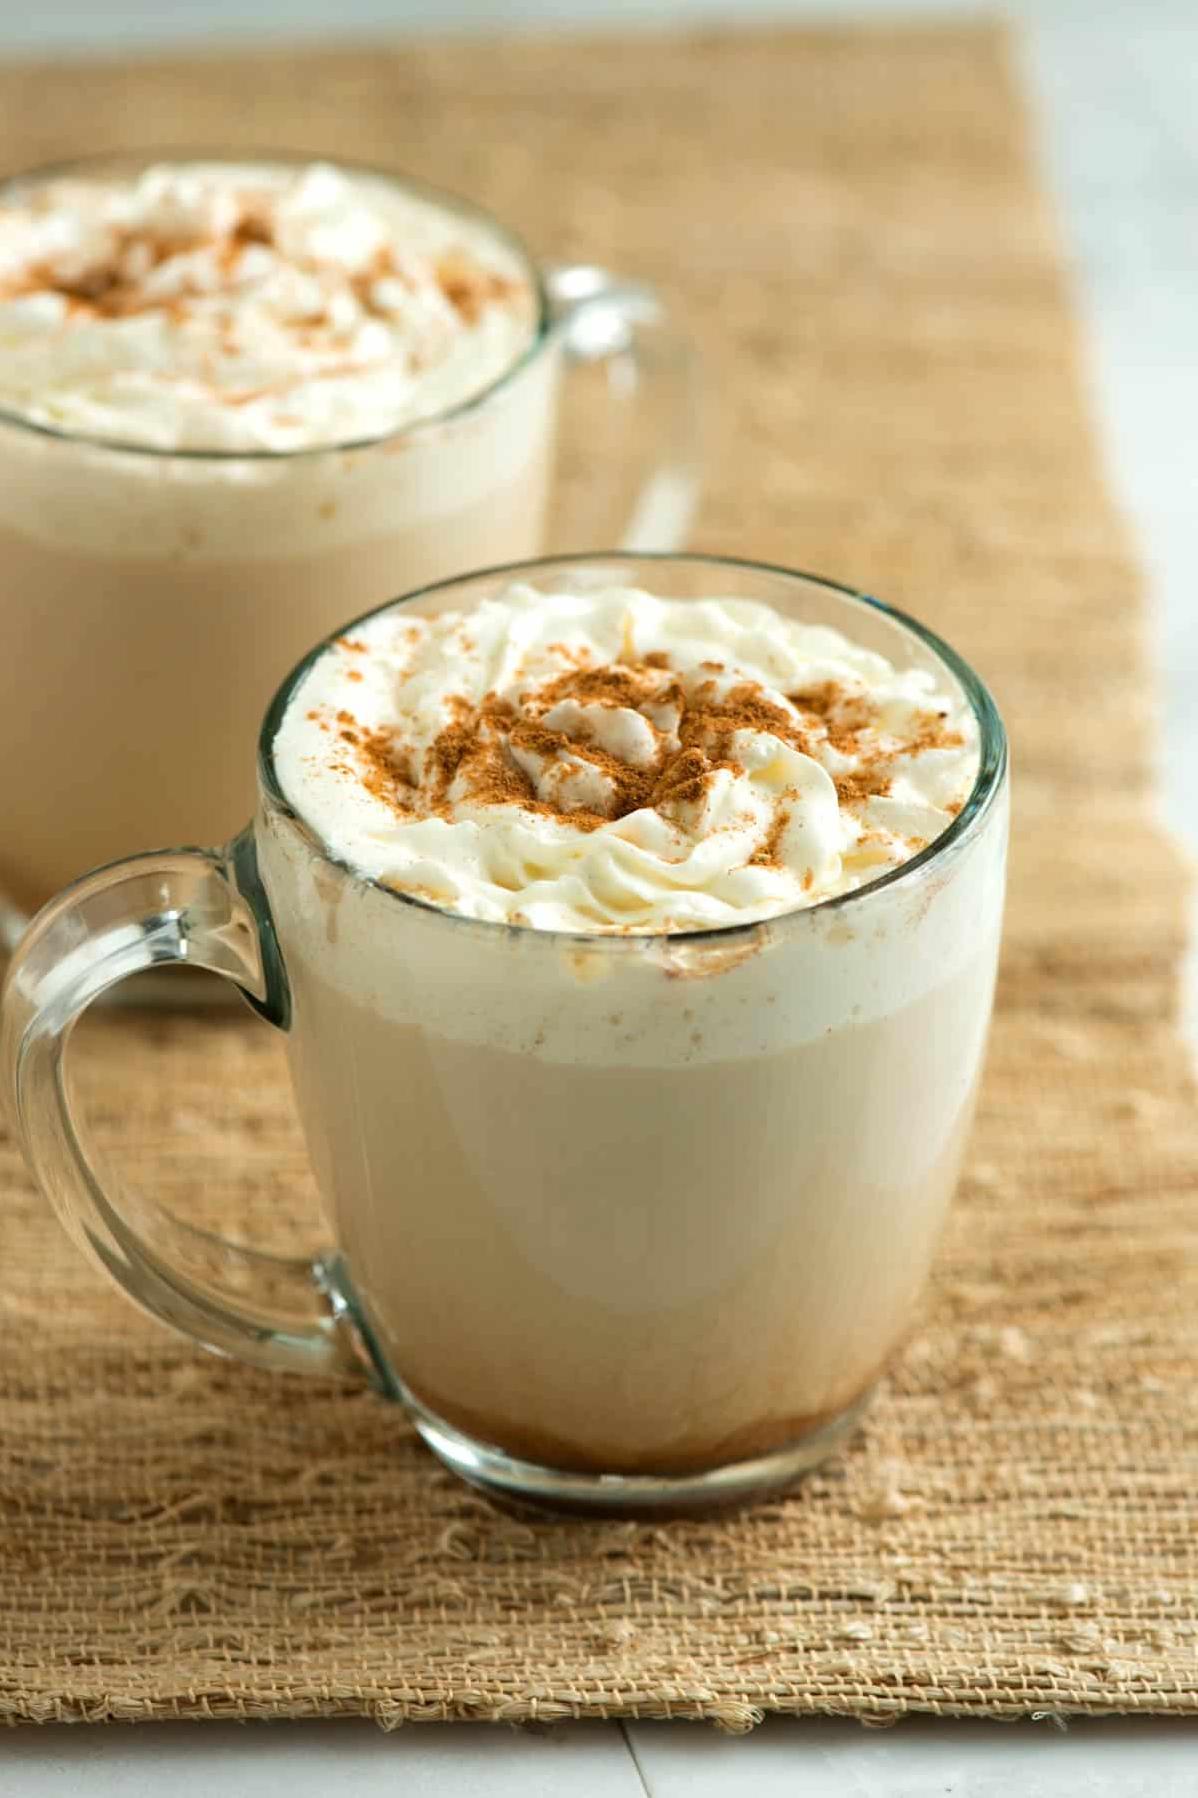  Wake up and smell the pumpkin spice coffee!